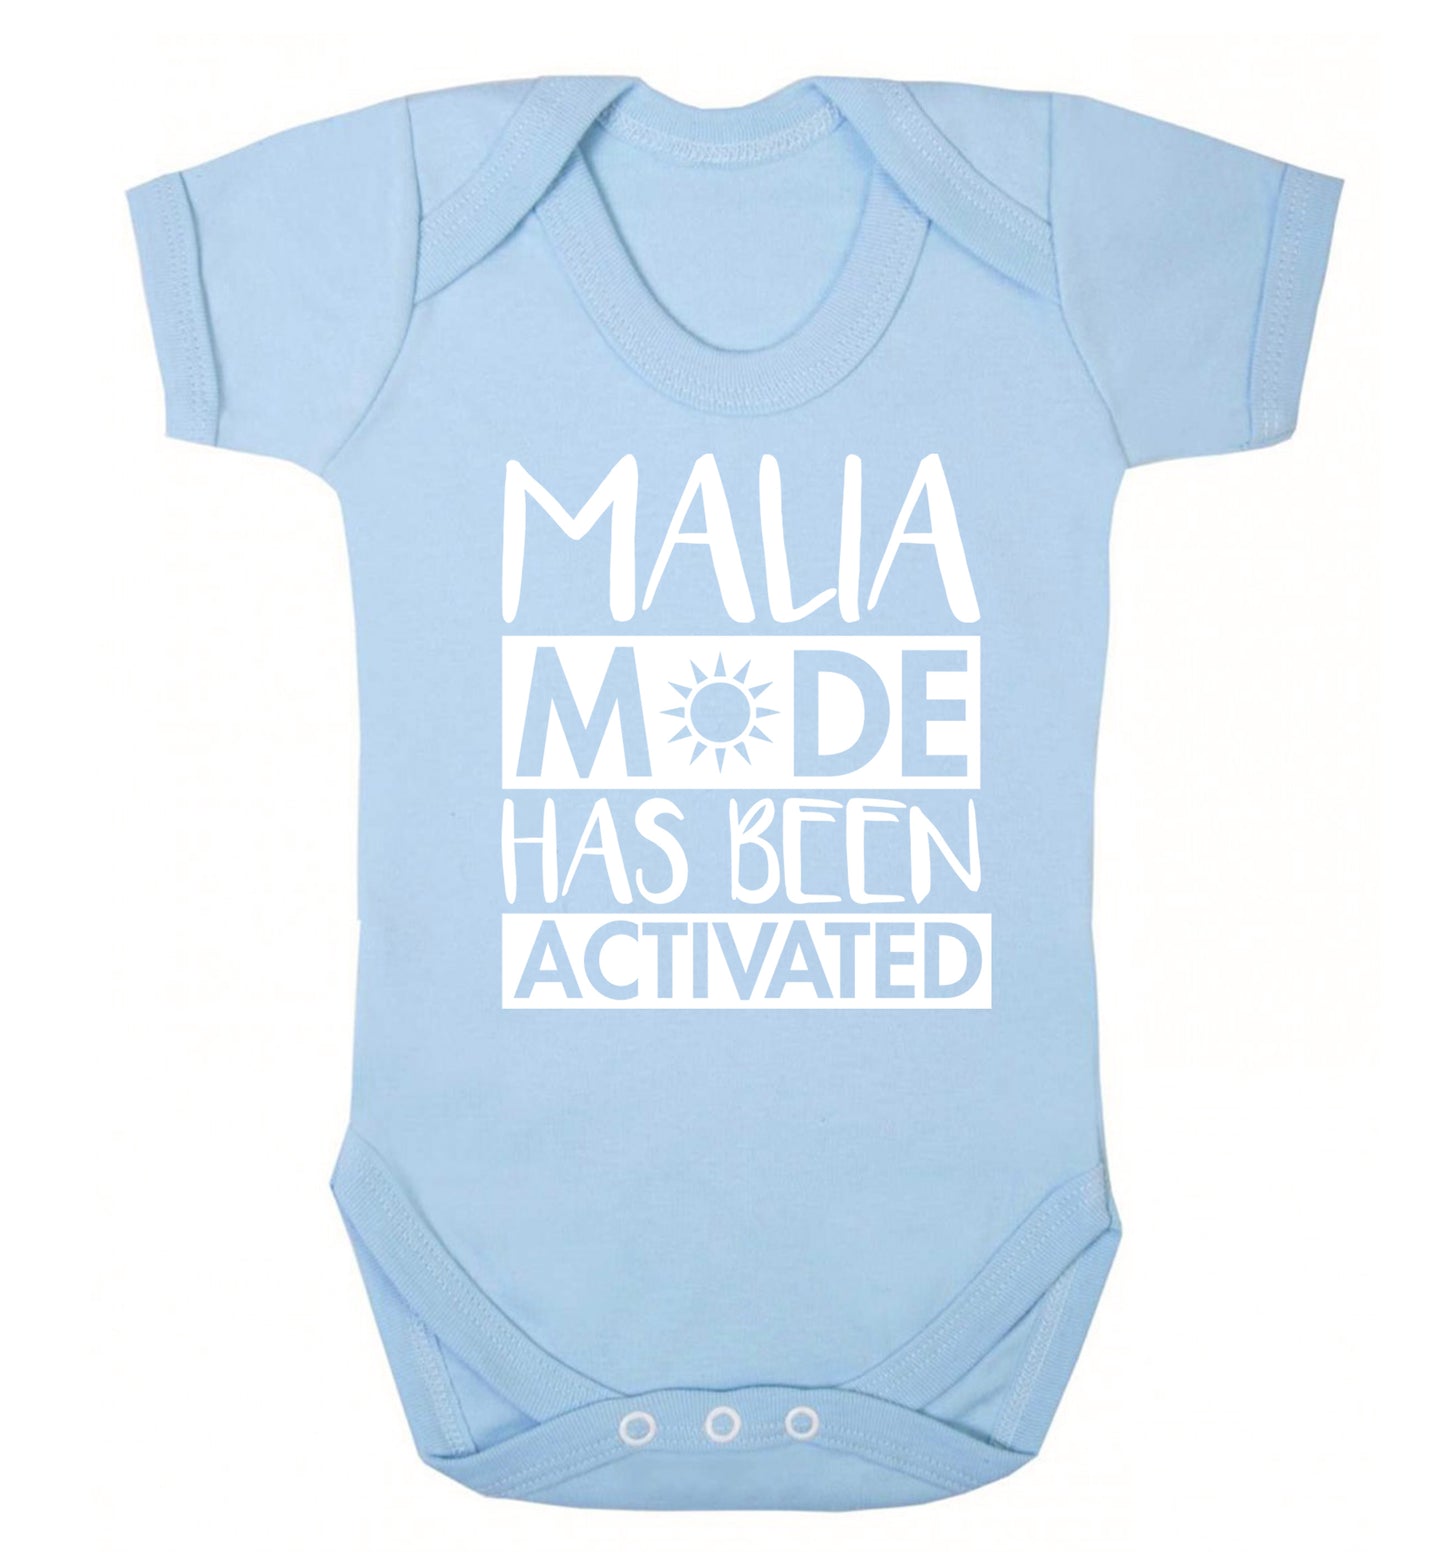 Malia mode has been activated Baby Vest pale blue 18-24 months